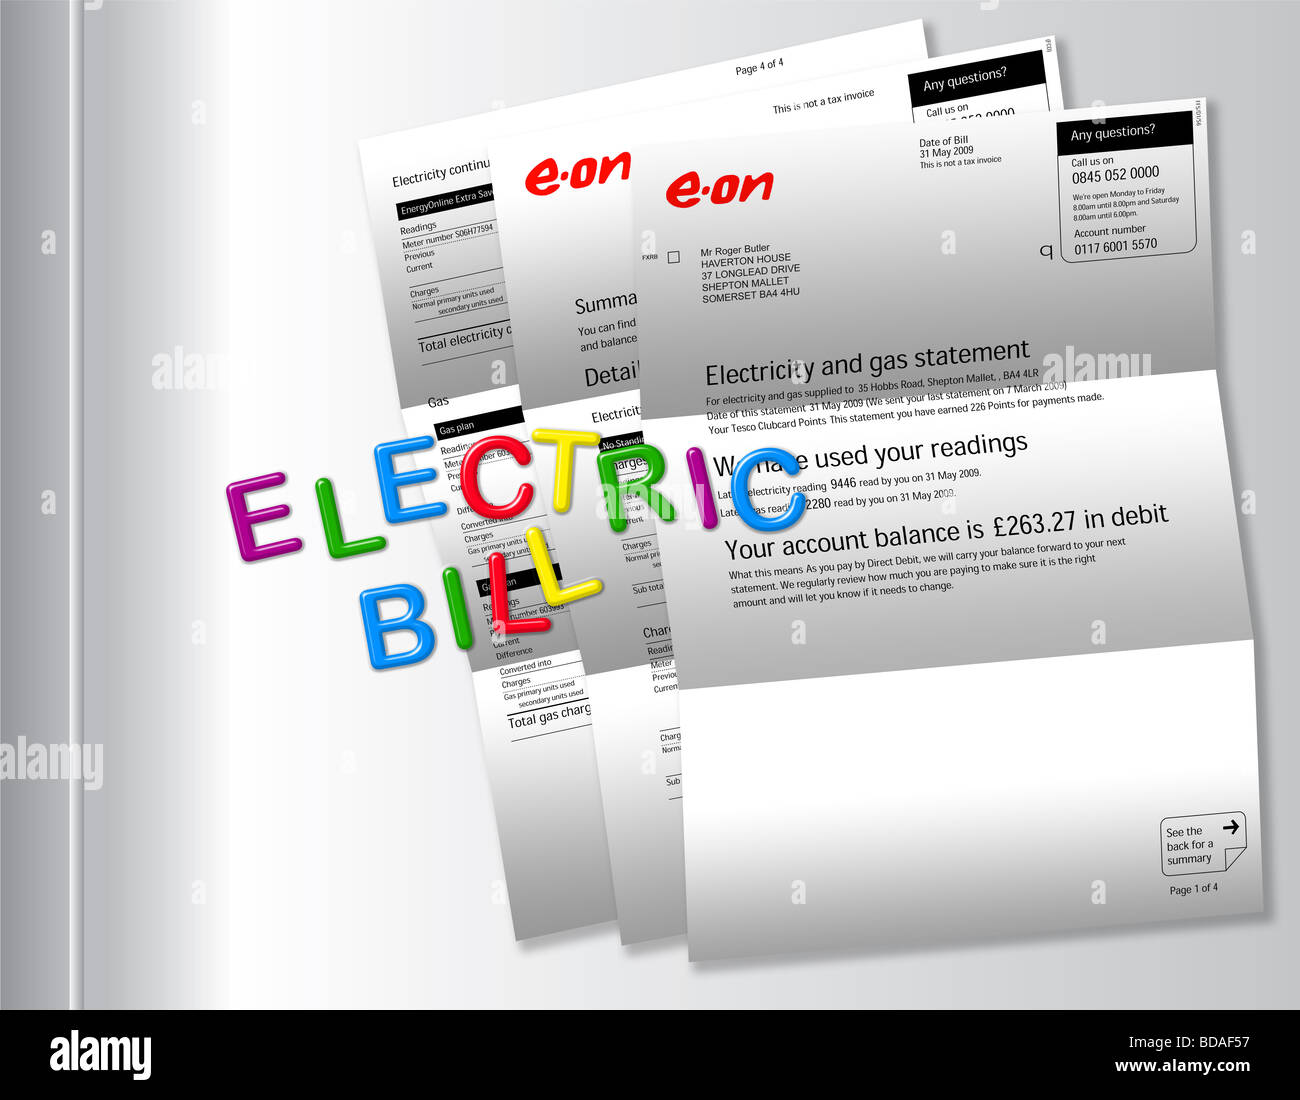 Electric bills on fridge with ‘ELECTRIC BILL’ spelt out by magnetic fridge letters. Stock Photo